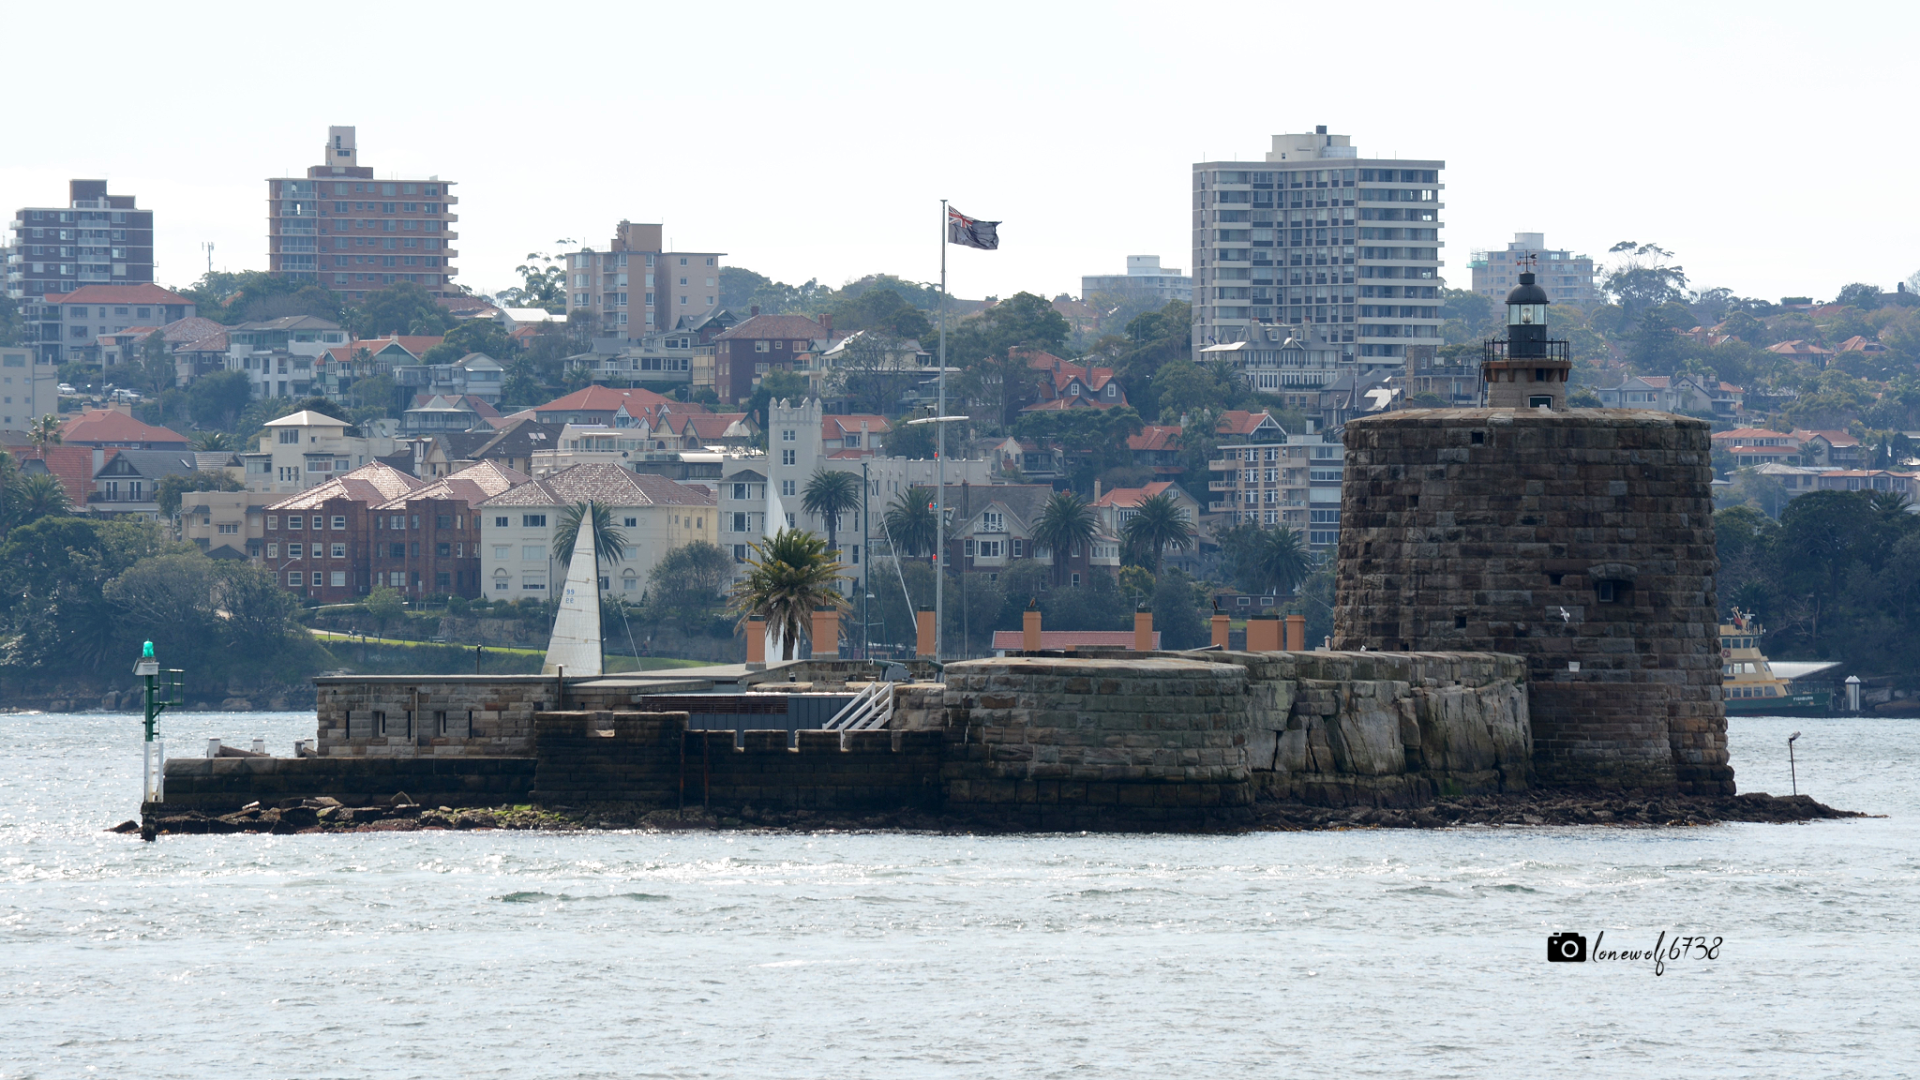 Fort Denison, (Pinchgut Island) a heritage-listed former penal site,Sydney, Photo by lonewolf6738